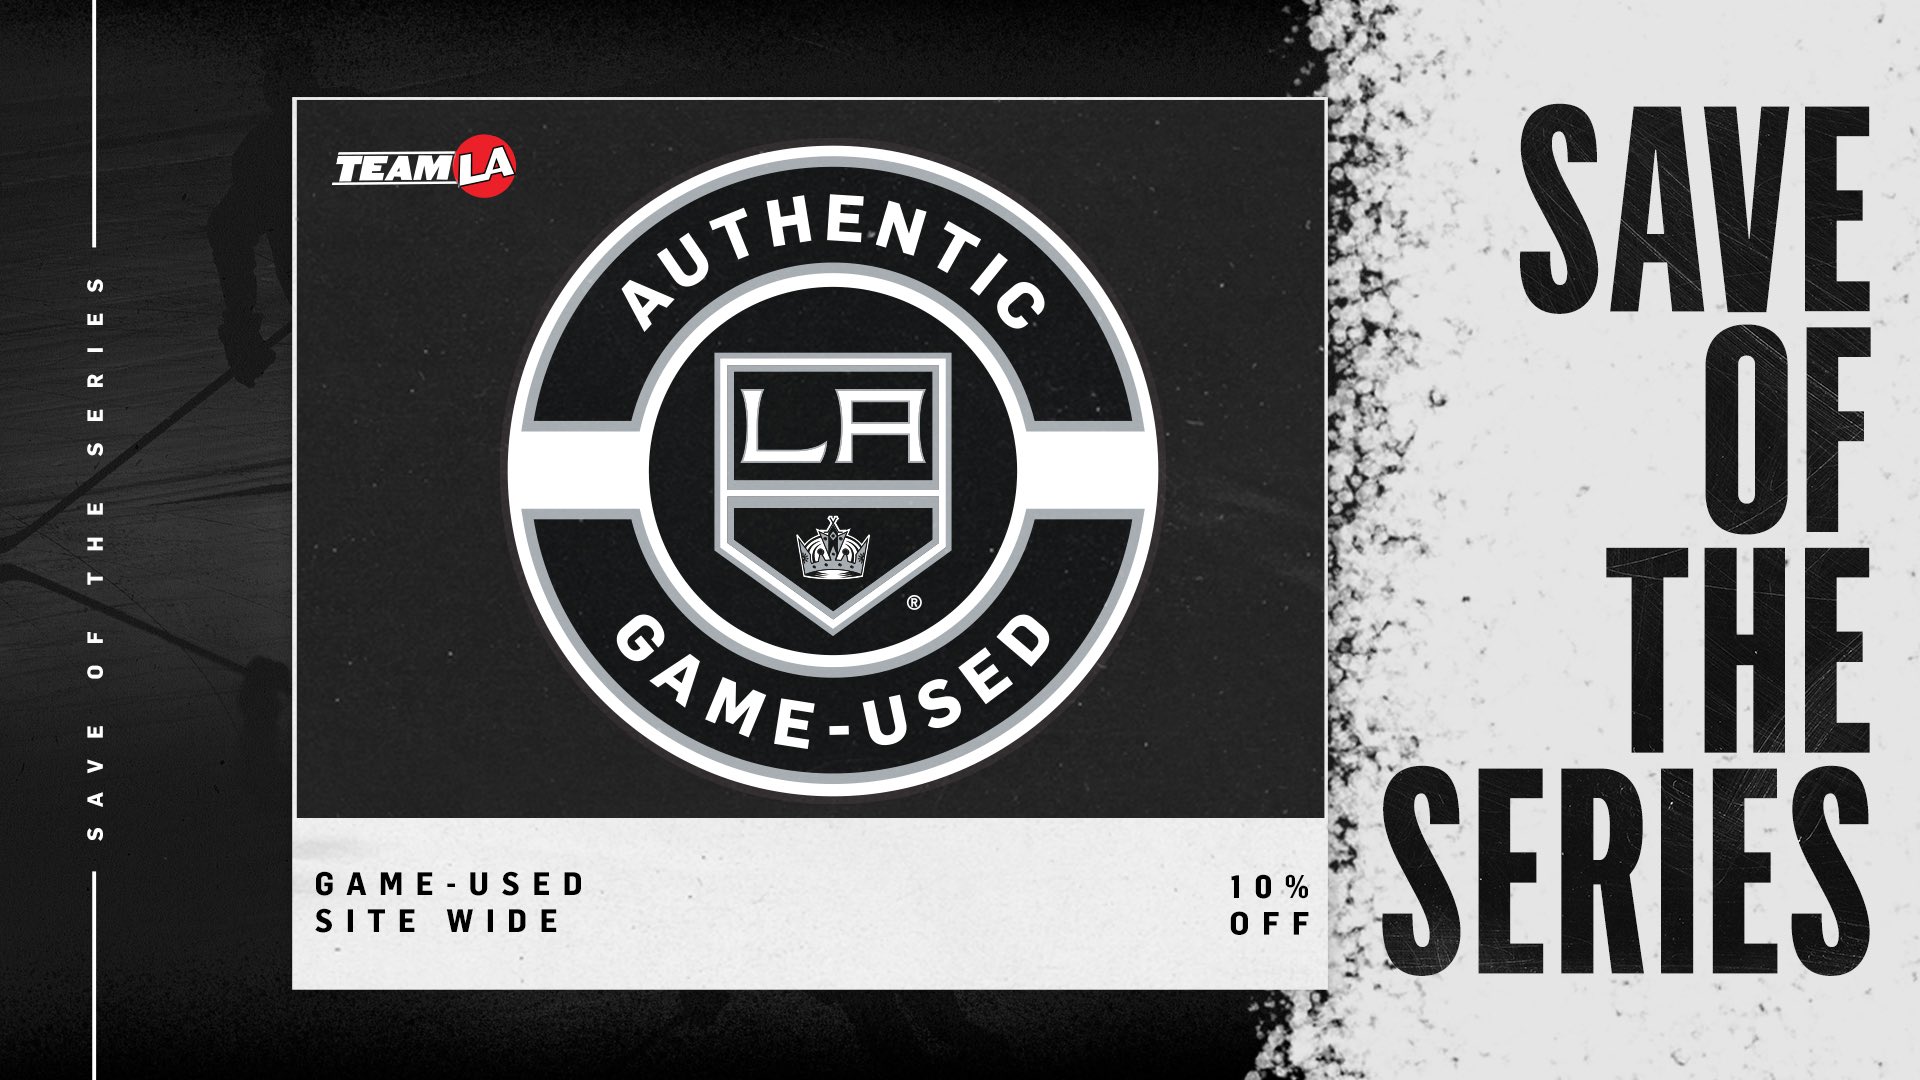 LA Kings - Head over to LA Kings Game Used today to take advantage of our  4th of July sale! 25% off your favorite player's jerseys, gear, and more 👇  🔗 lakingsgameused.com